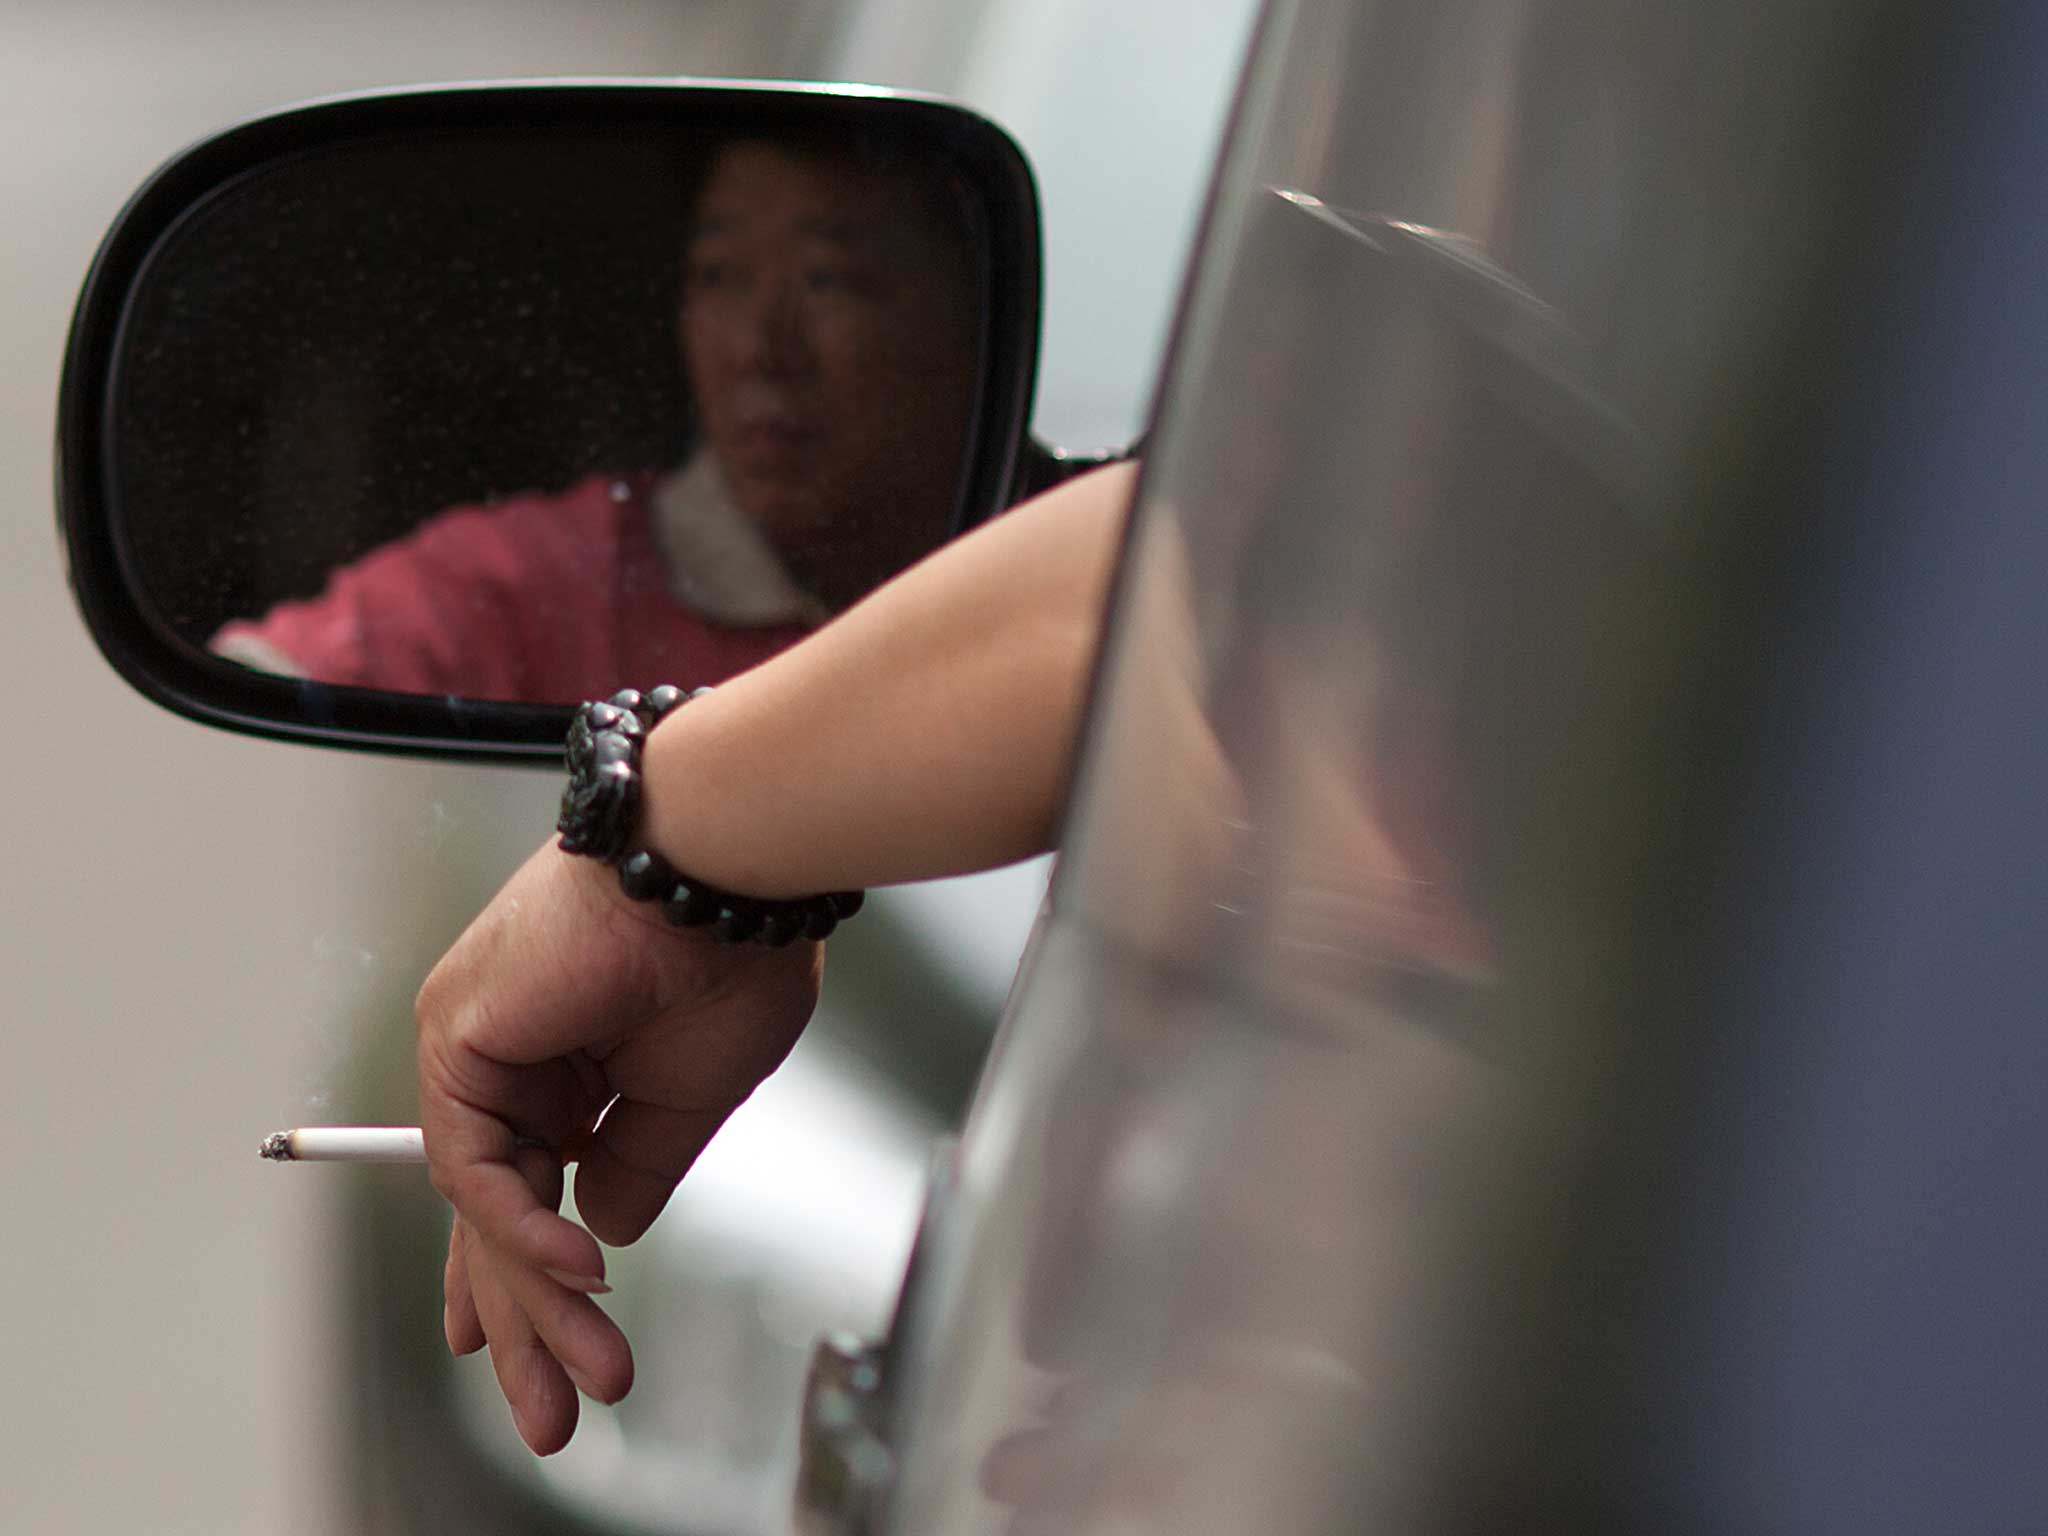 Motorists could be fined £50 if they are found smoking in a car when a child is present